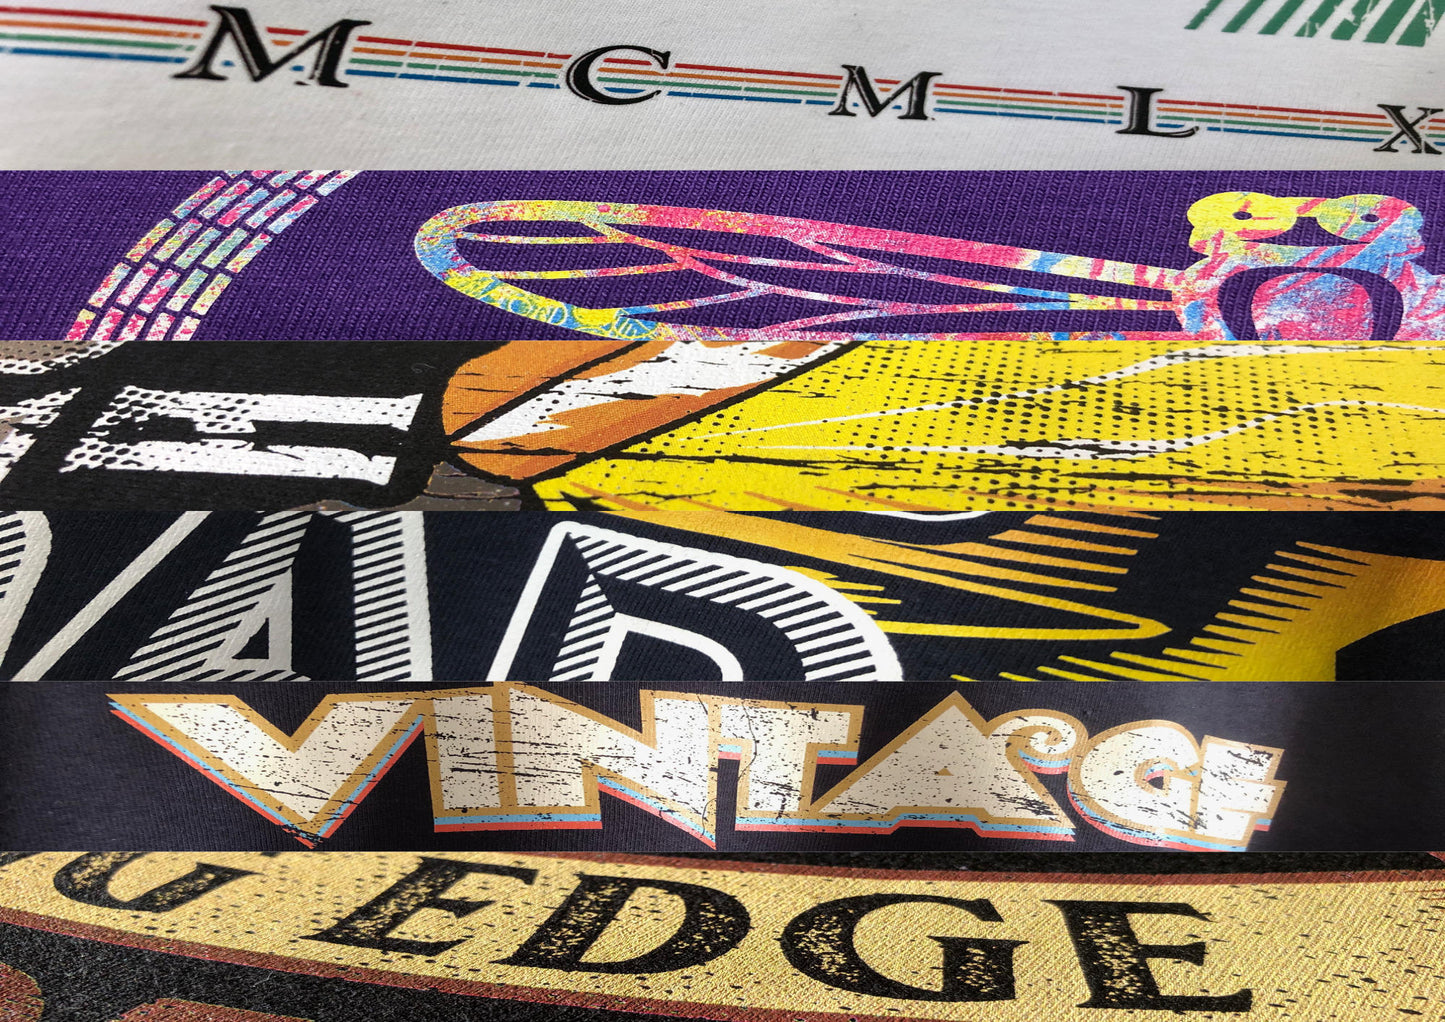 Full Colour Digital Laser Printed Transfers - Ready-To-Press